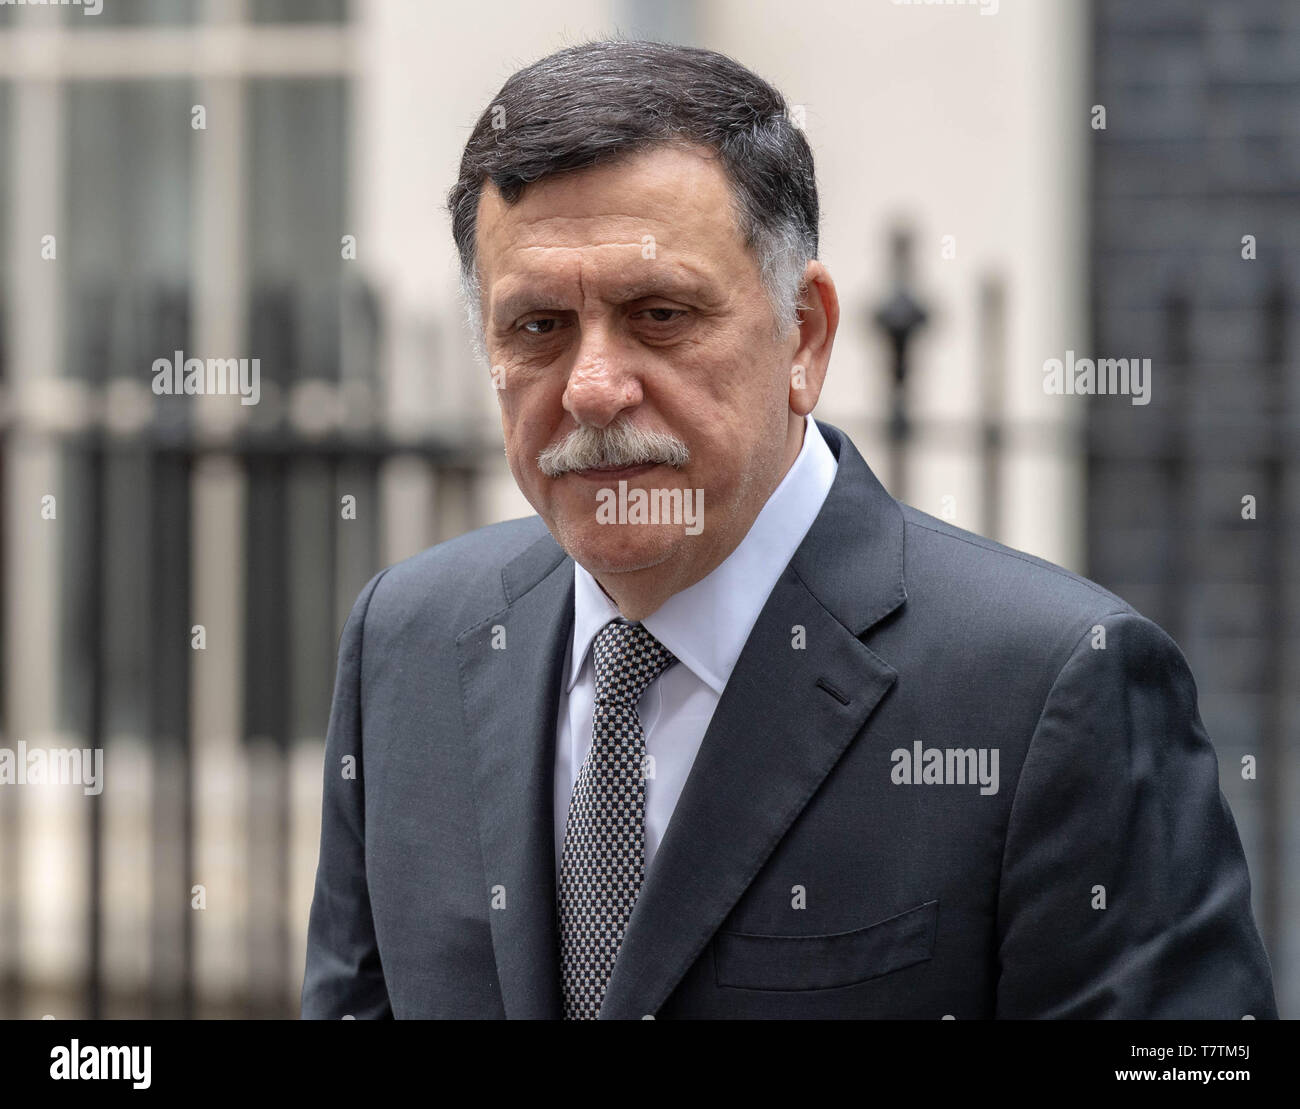 London, UK. 9th May 2019. The Prime Minister of  Libya  Fayez Mustafa al-Sarraj  leaves a meeting with Theresa May MP PC,  Prime Minister  at 10 Downing Street, where it is reported that the Theresa May MP PC, Prime Minister expressed her concern about the current conflict in Libya Credit Ian Davidson/Alamy Live News Stock Photo